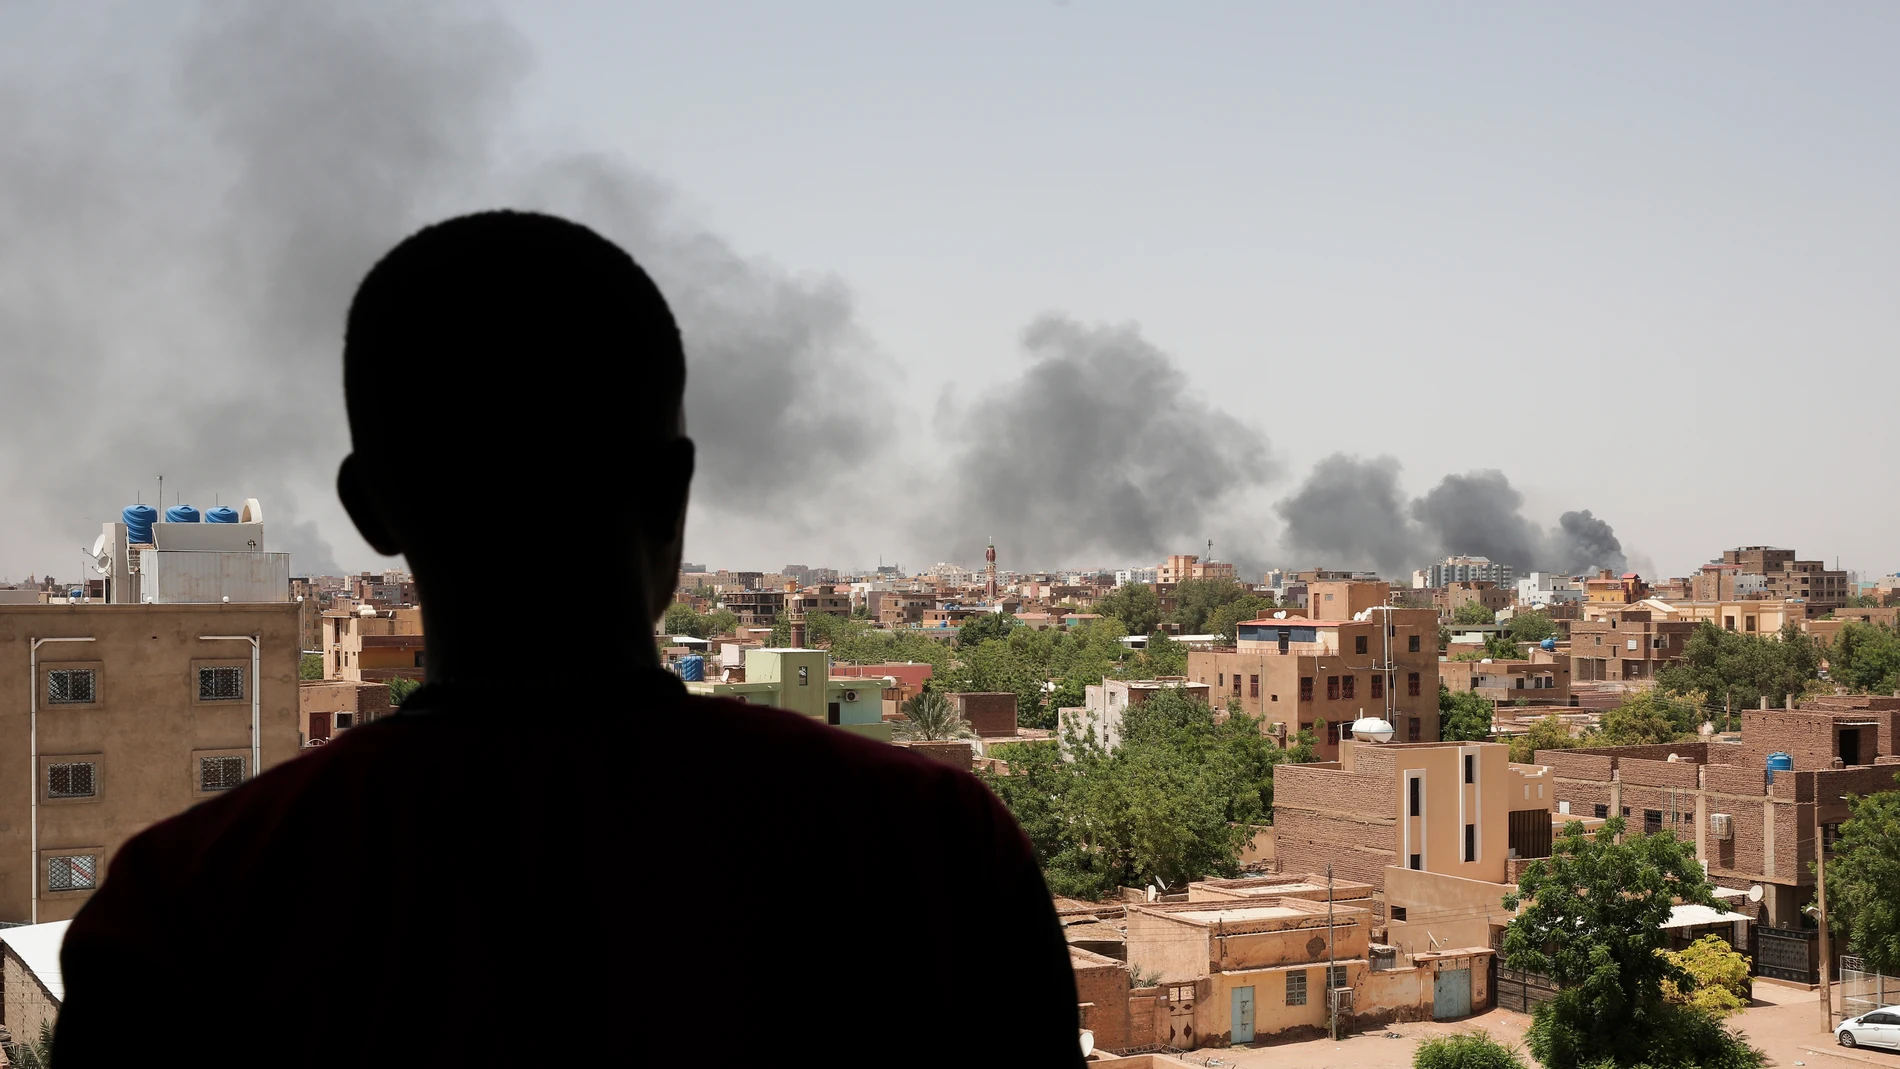 FILE - Smoke is seen in Khartoum, Sudan, Saturday, April 22, 2023. Khartoum, a city of some 5 million people, has been transformed into a front line in the grinding conflict between Gen. Abdel Fattah Burhan, the commander of Sudan’s military, and Gen. Mohammed Hamdan Dagalo, who leads the powerful paramilitary group known as the Rapid Support Forces. The outbreak of violence has dashed once-euphoric hopes for a democratic transition in Sudan after a popular uprising helped oust former dictator Omar al-Bashir. (AP Photo/Marwan Ali, File)